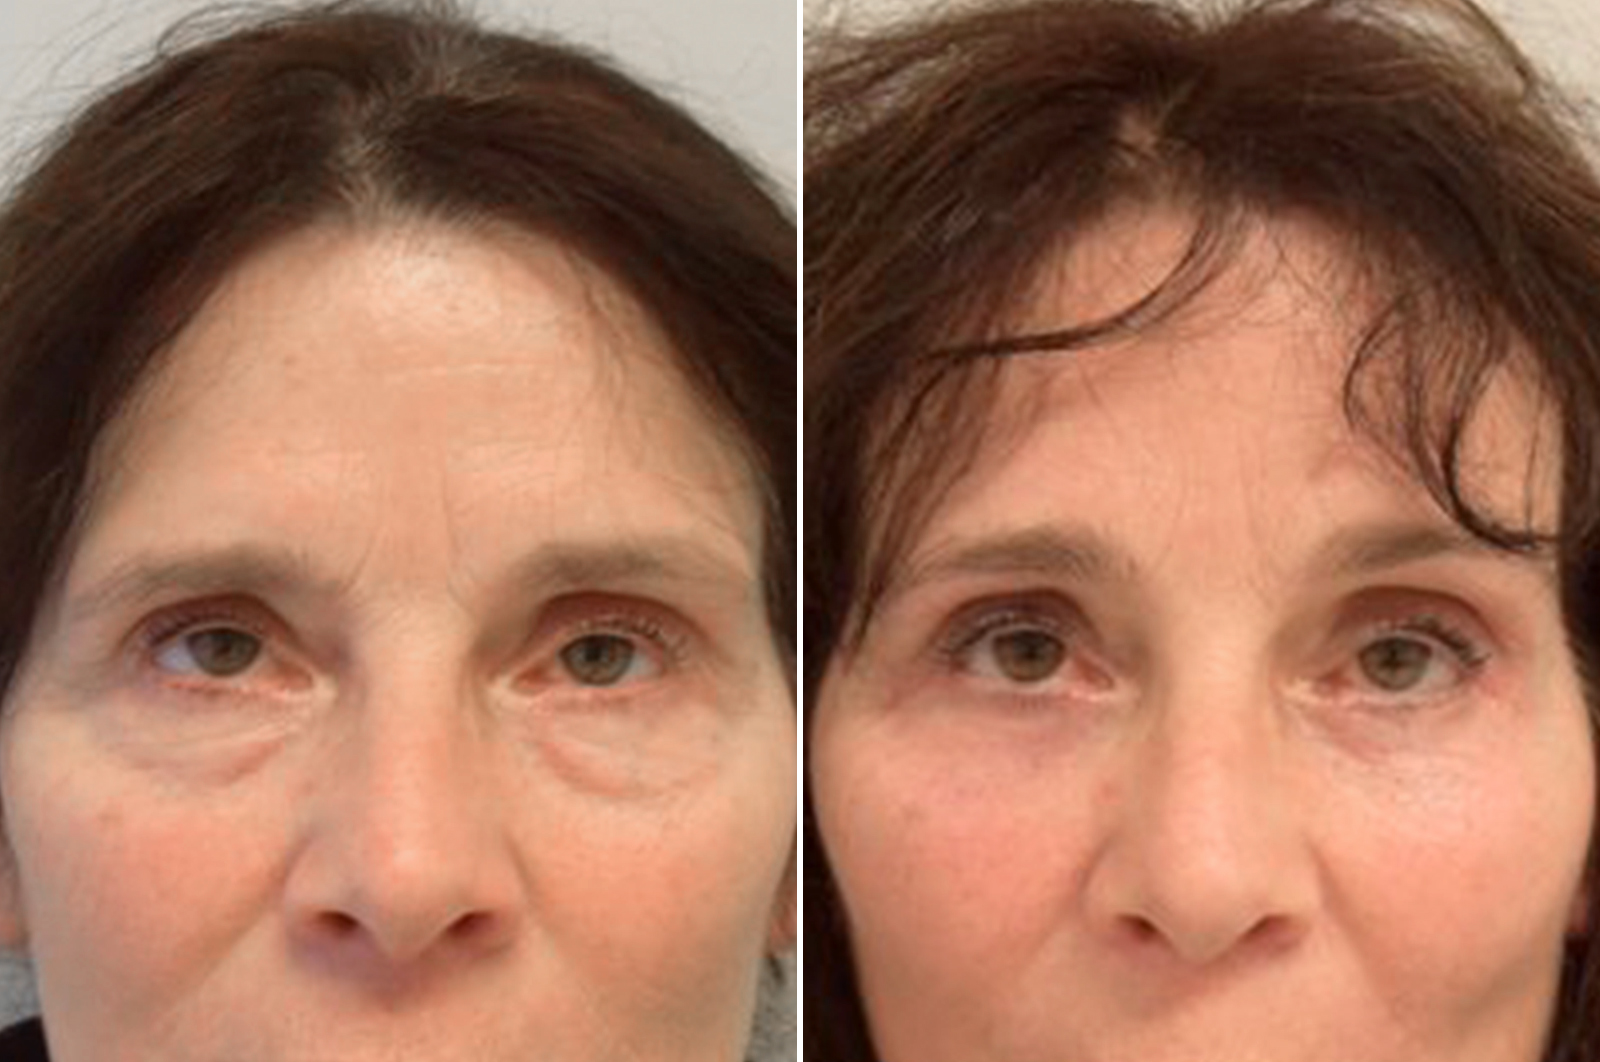 Facial surgery for forehead lift before and after surgery in antwerp